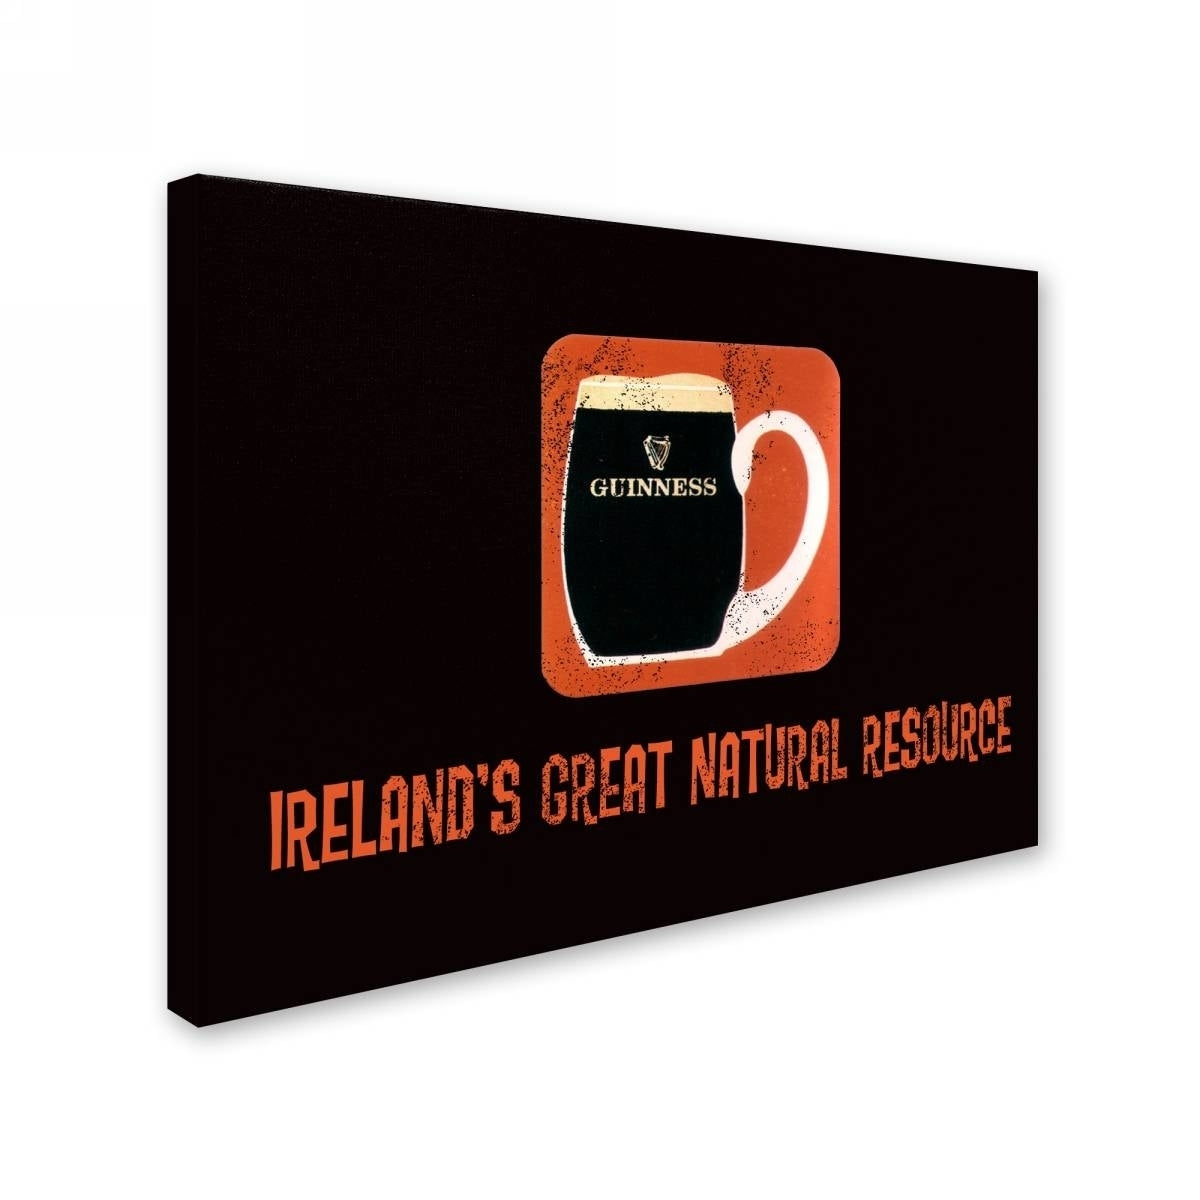 Guinness Brewery's comedic gem on a Guinness Brewery 'Ireland's Great Natural Resource' Canvas Art.